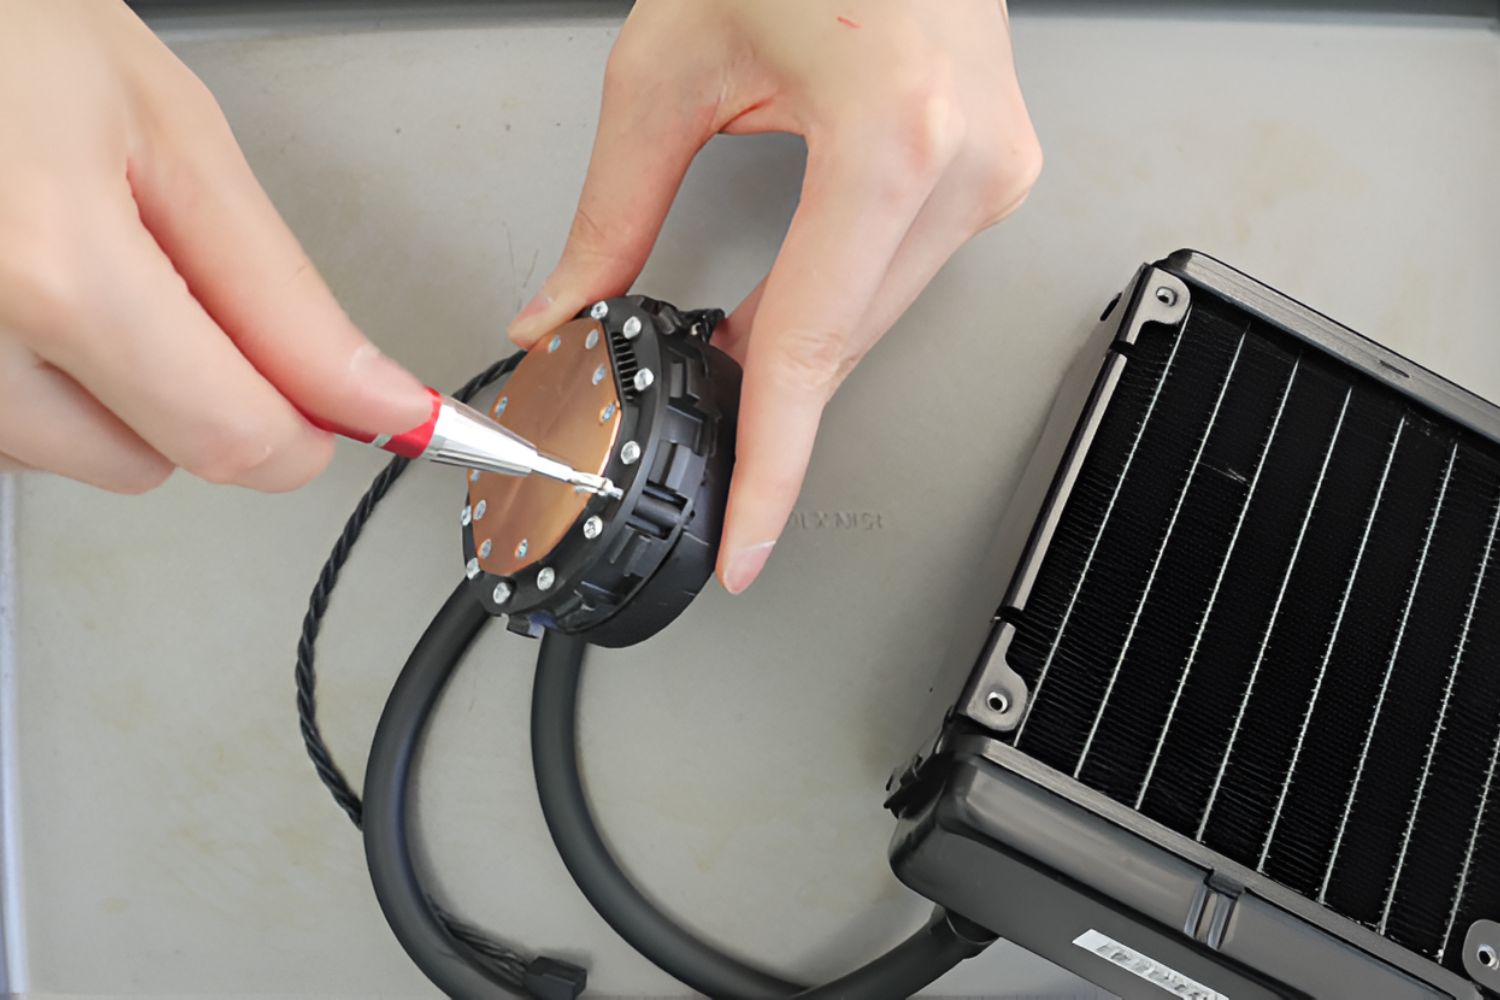 How To Test A CPU Cooler